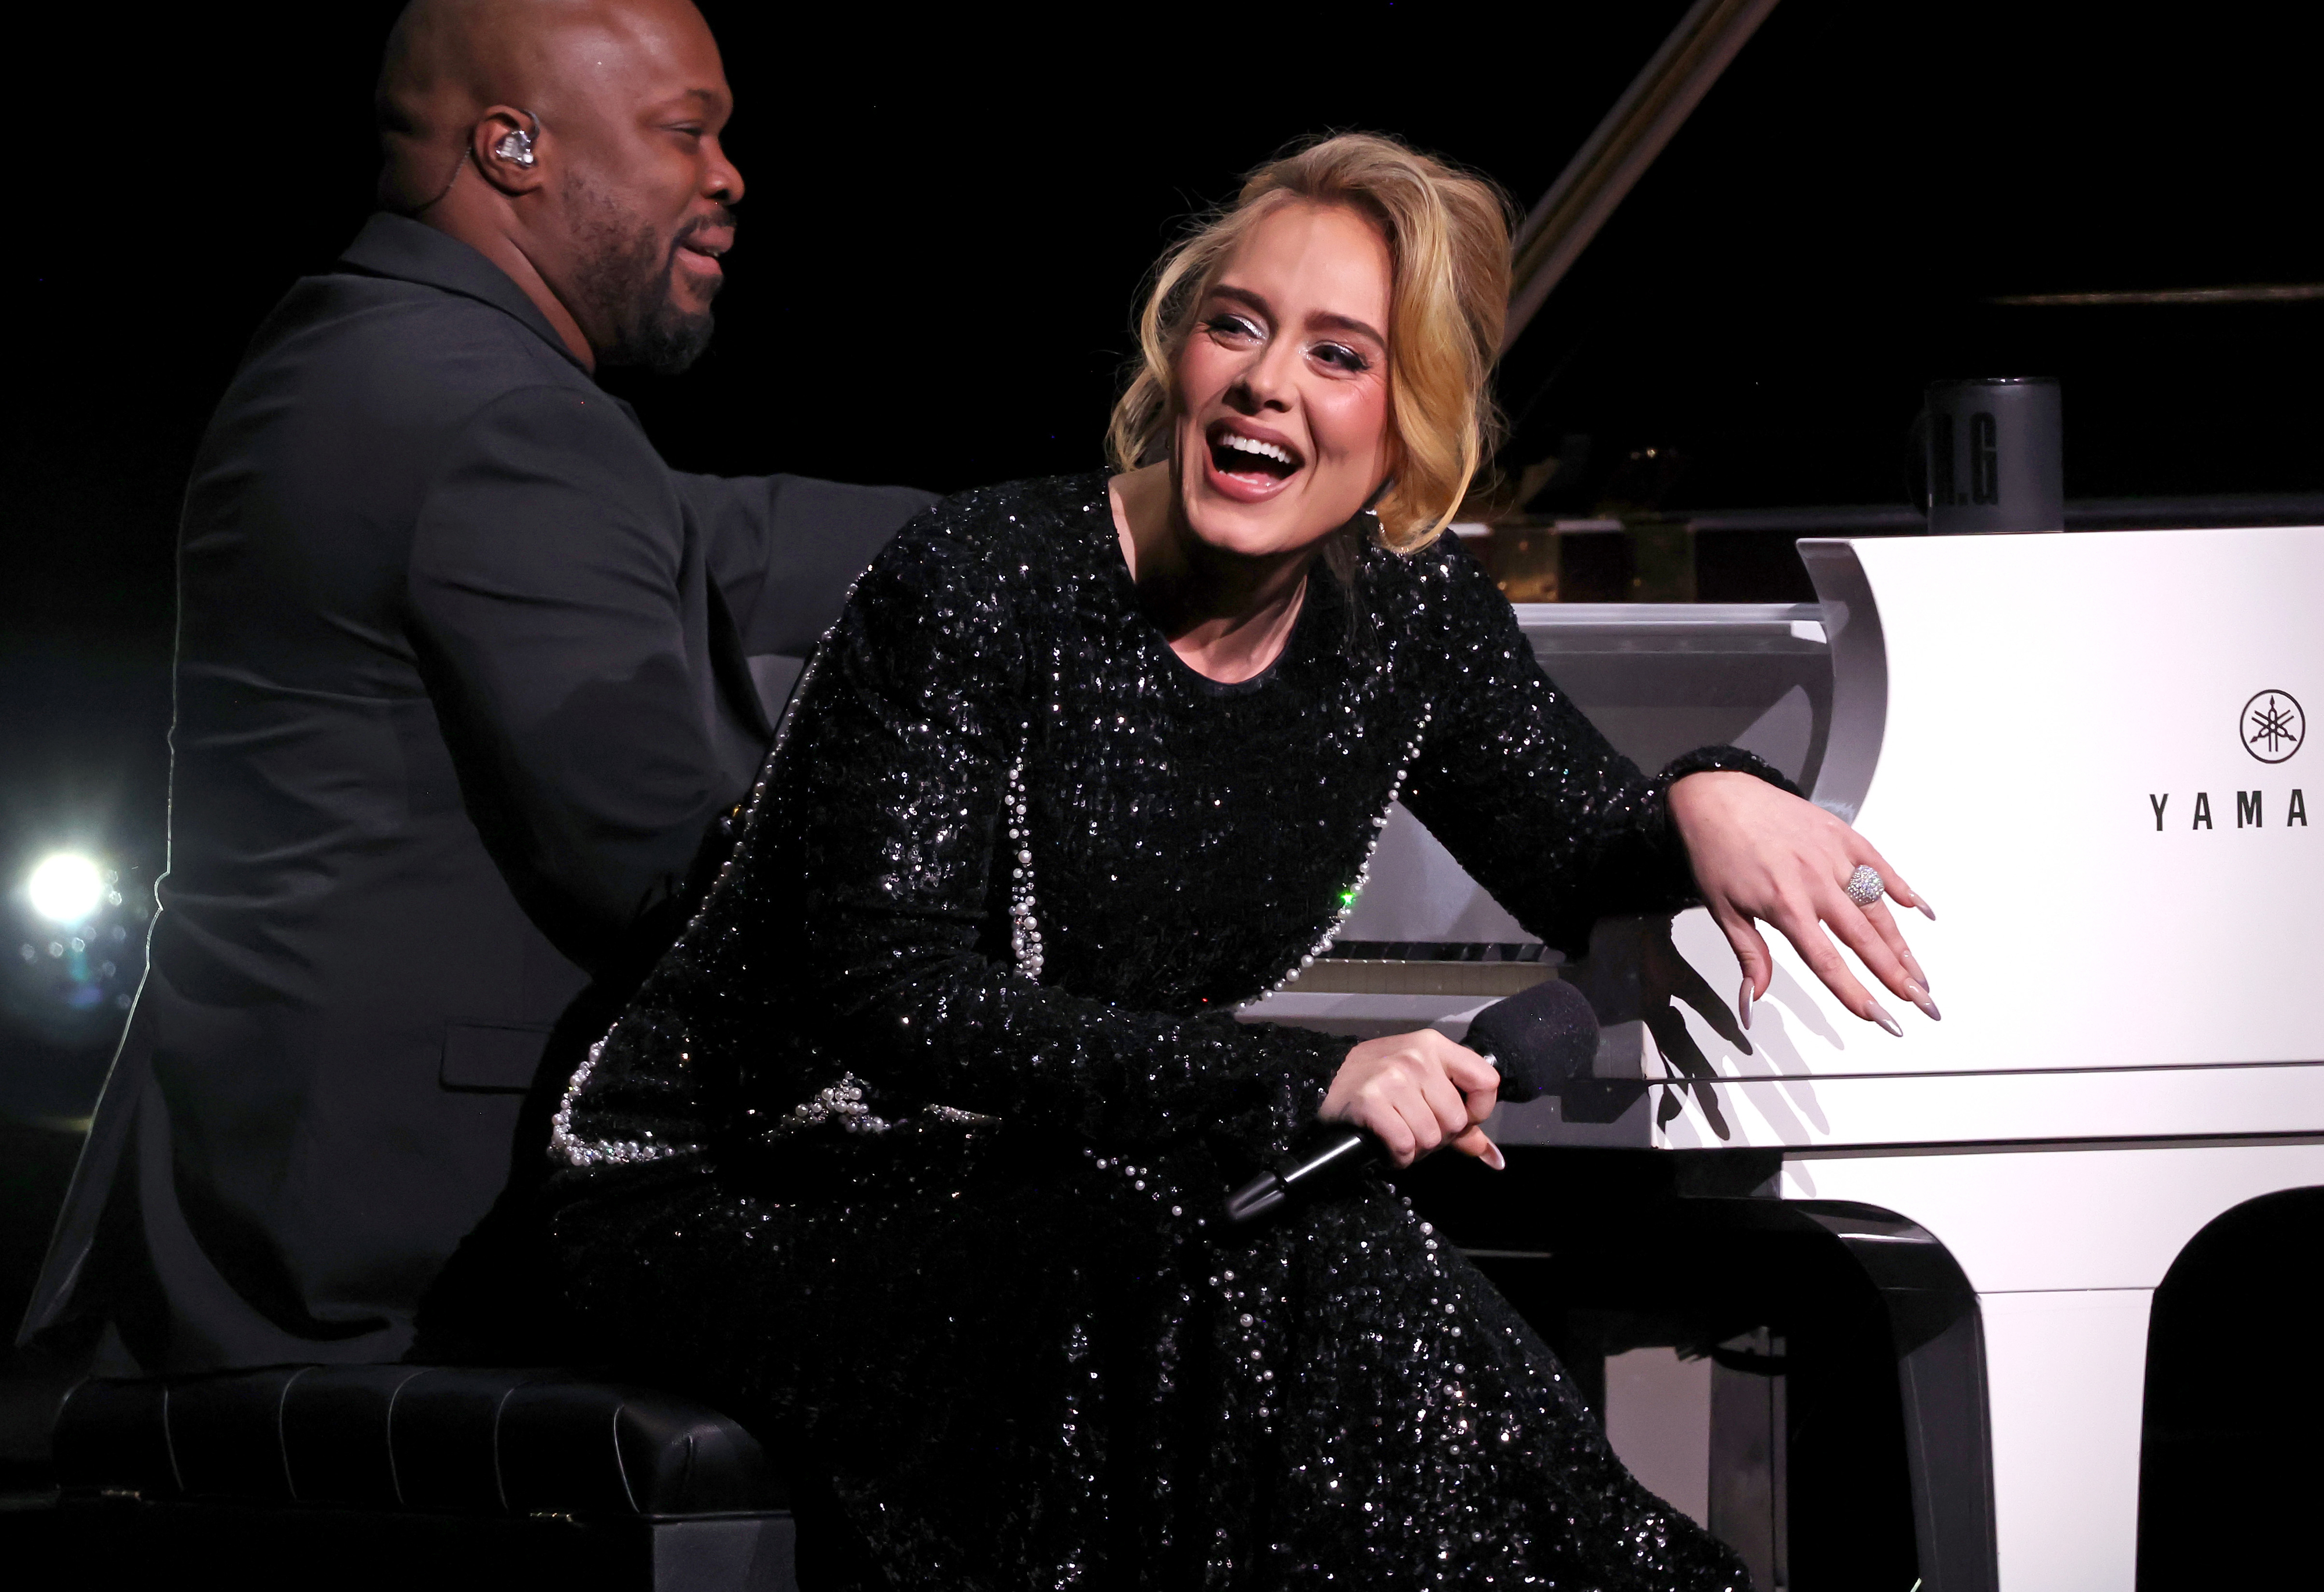 Adele laughing next to a pianist on stage, wearing a long-sleeved black glittery dress